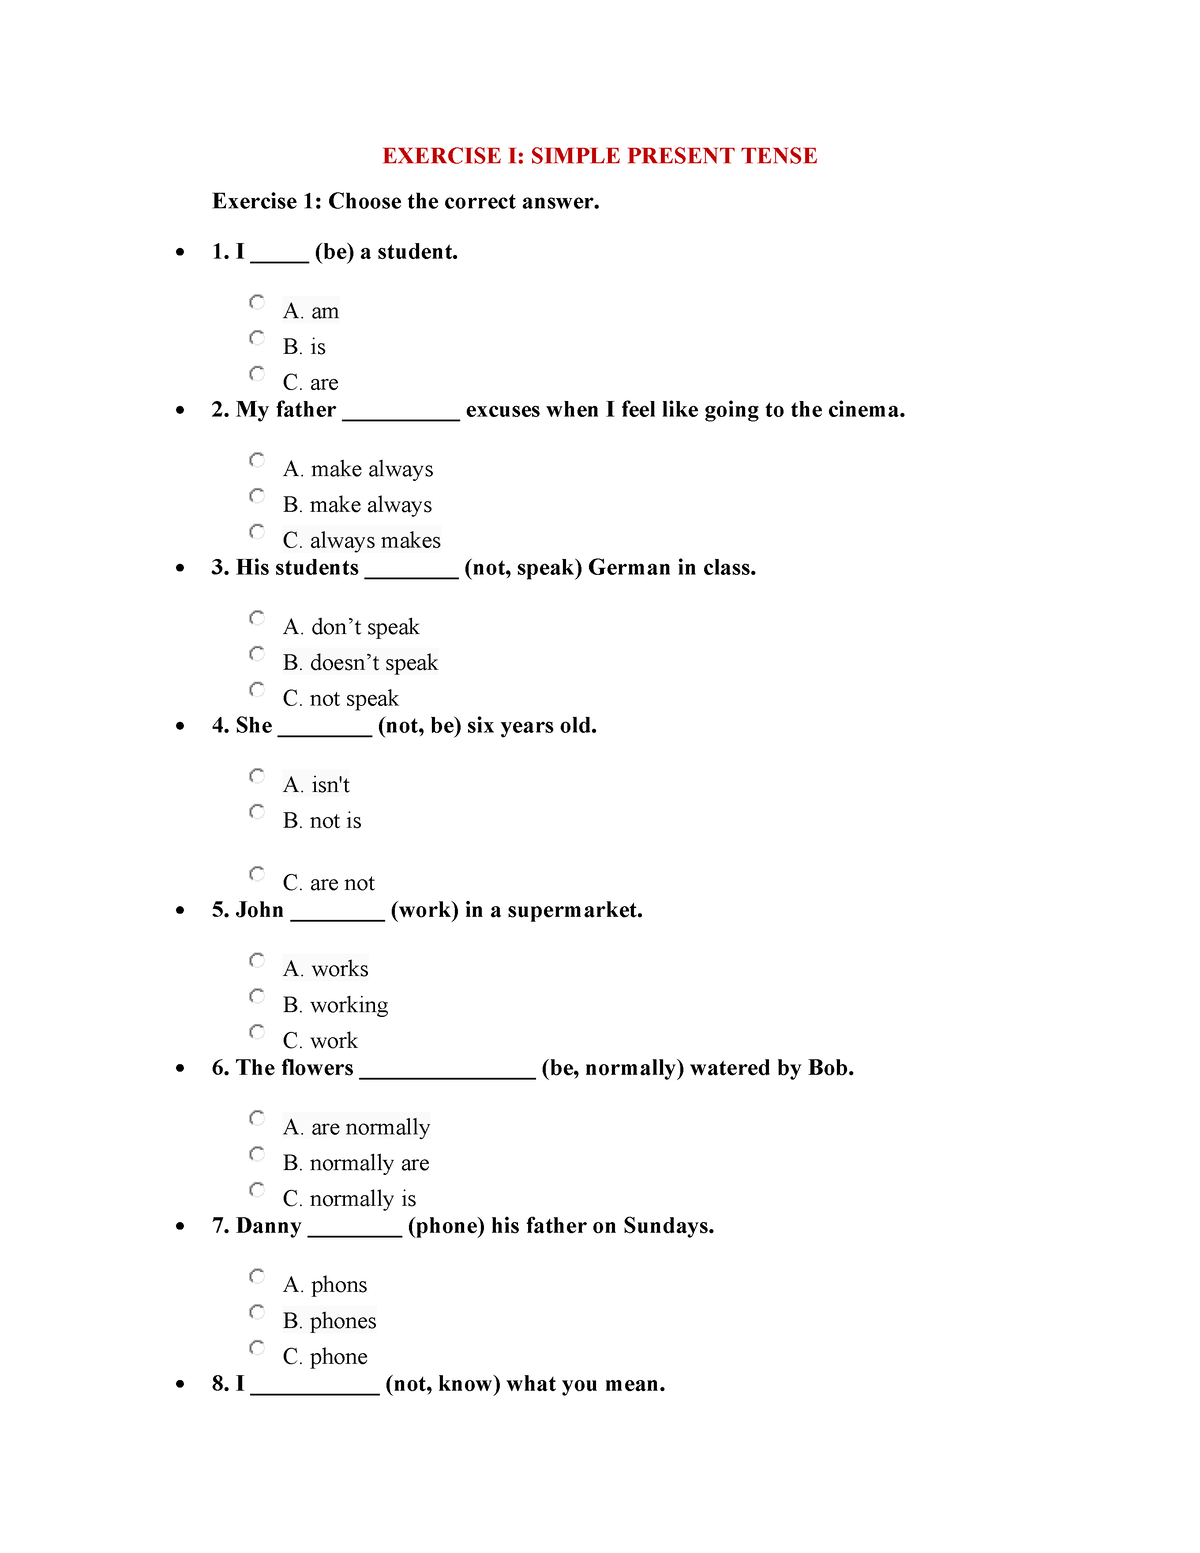 Exercise 1 Present Simple Tense Exercise I Simple Present Tense